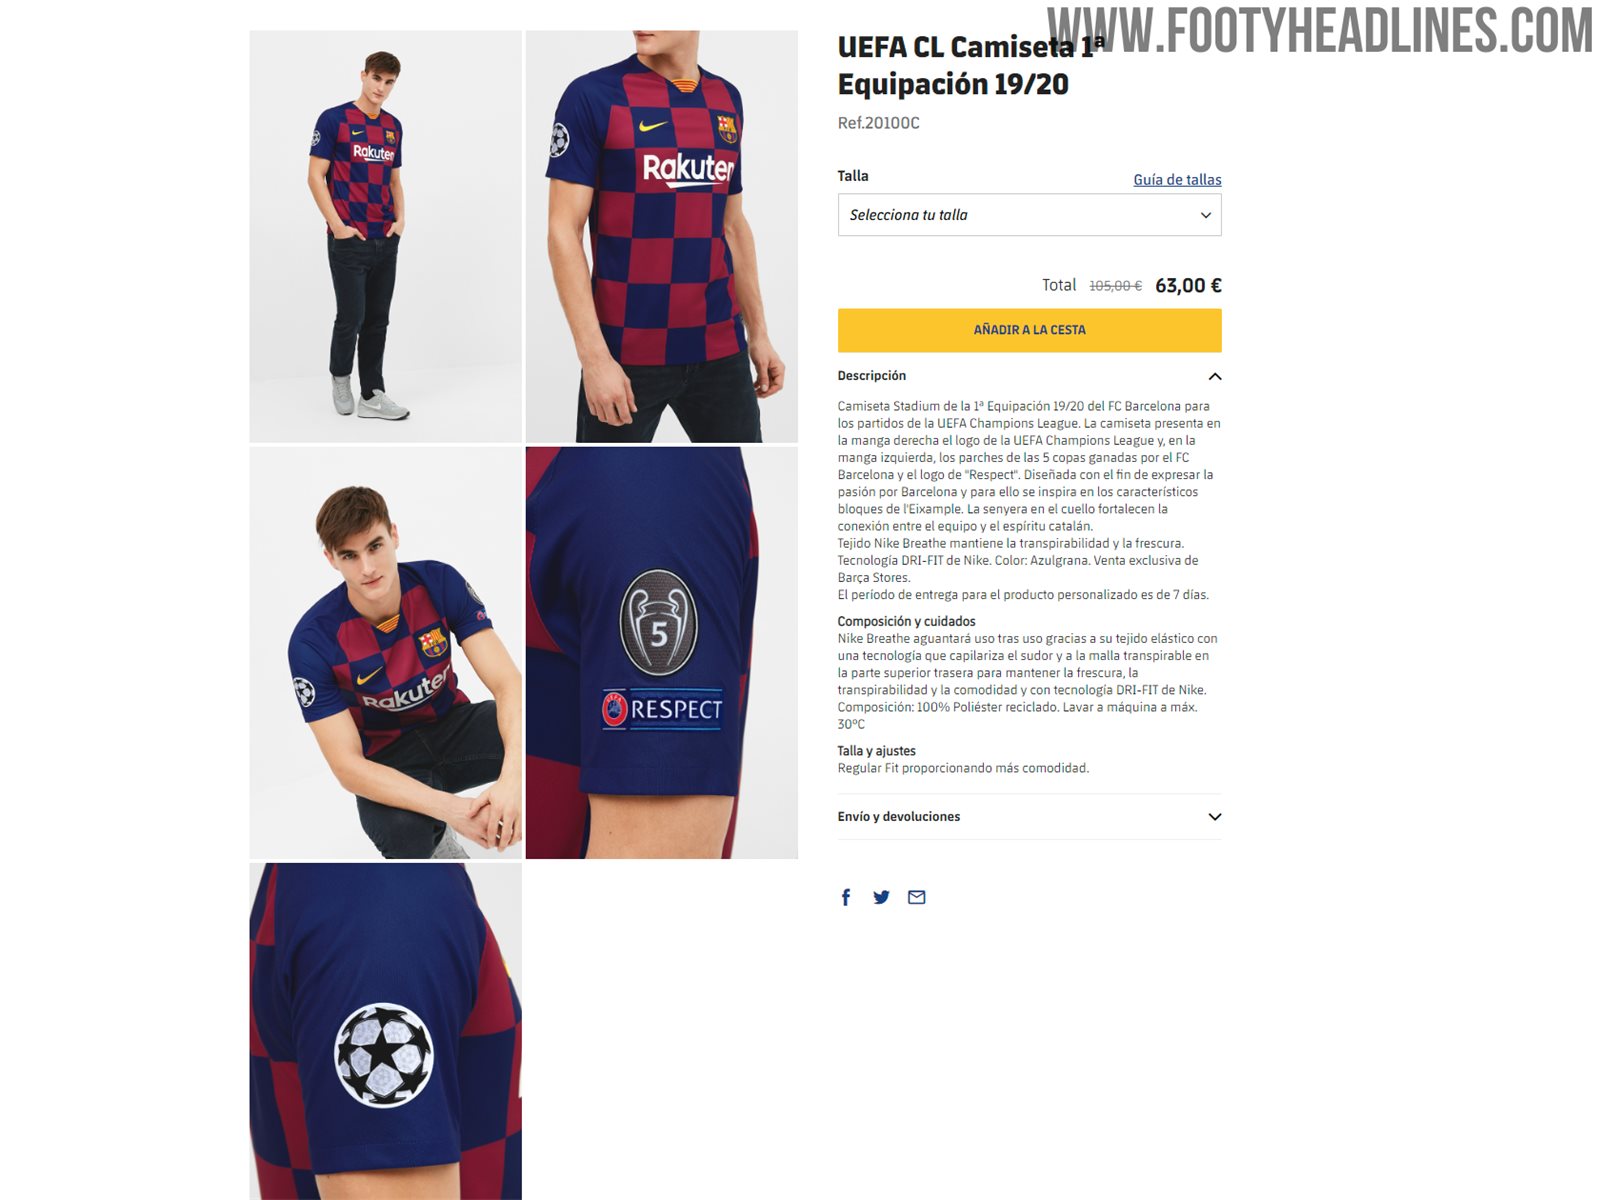 Not Nike Anymore: FC Barcelona Gets Own Online Store - League Kits Finally Available Online - Footy Headlines